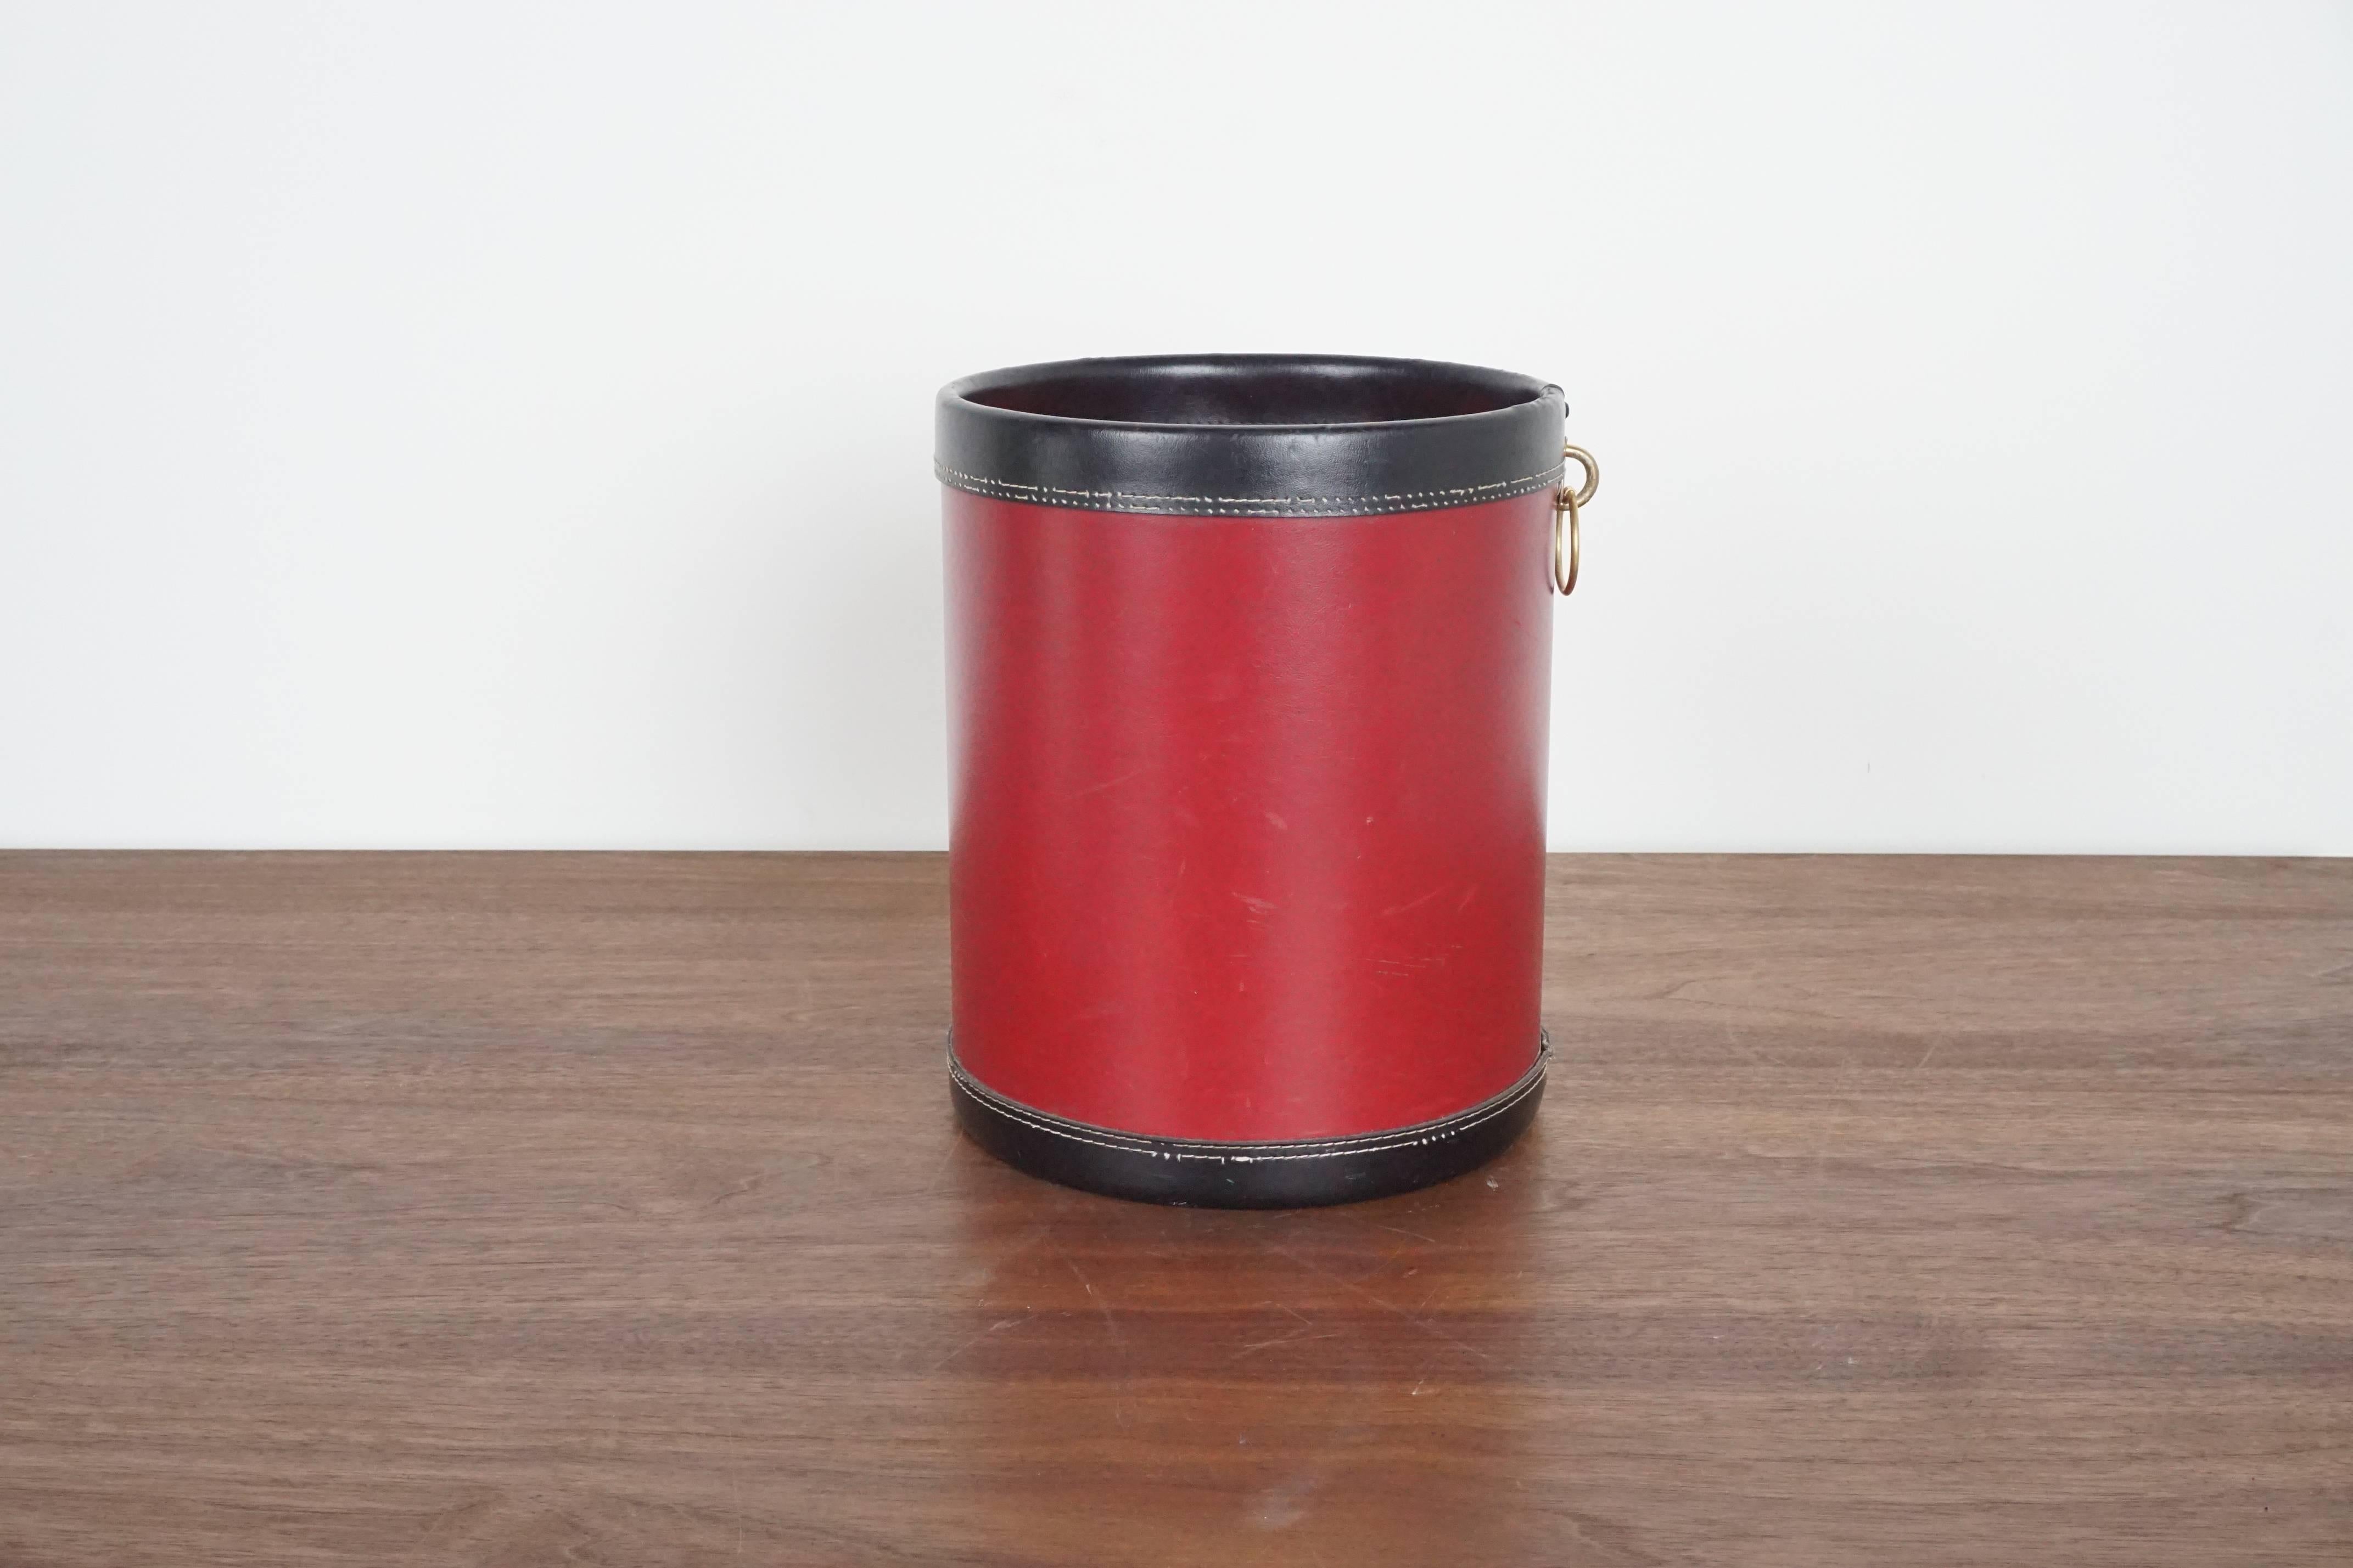 Red leather waste paper basket, France, 1950s in the style of Jacques Adnet. Black leather trim with contrast stitching and brass detailing.